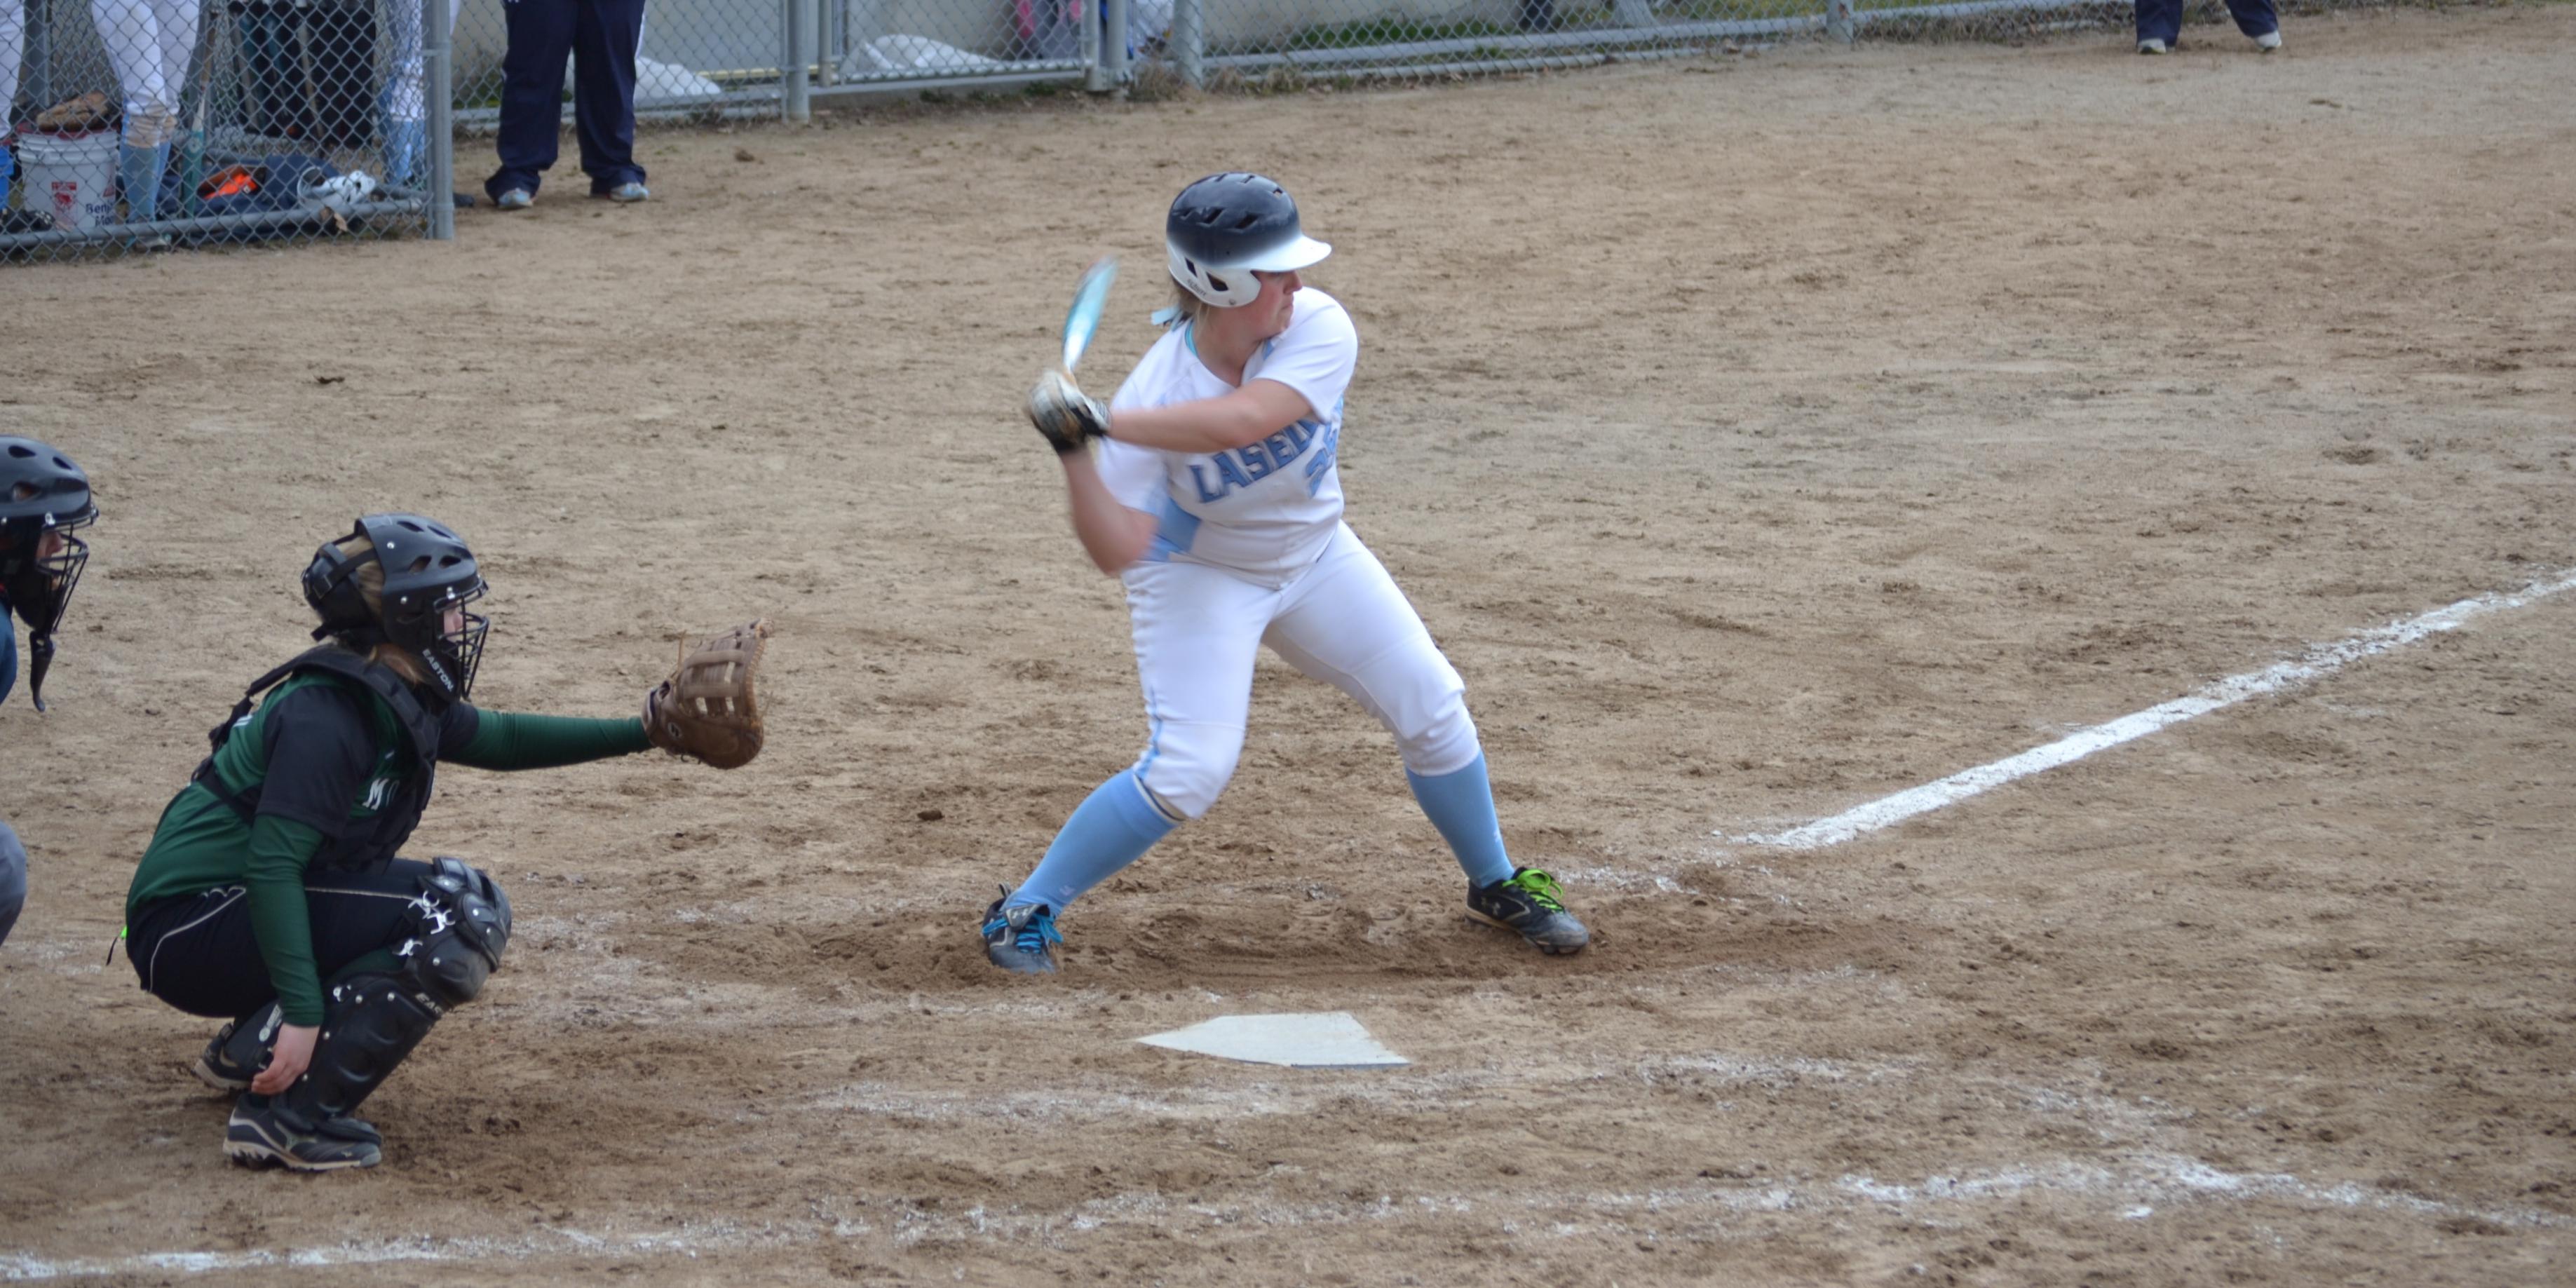 Pikeville Stops Lasell, 9-1 in Softball Action